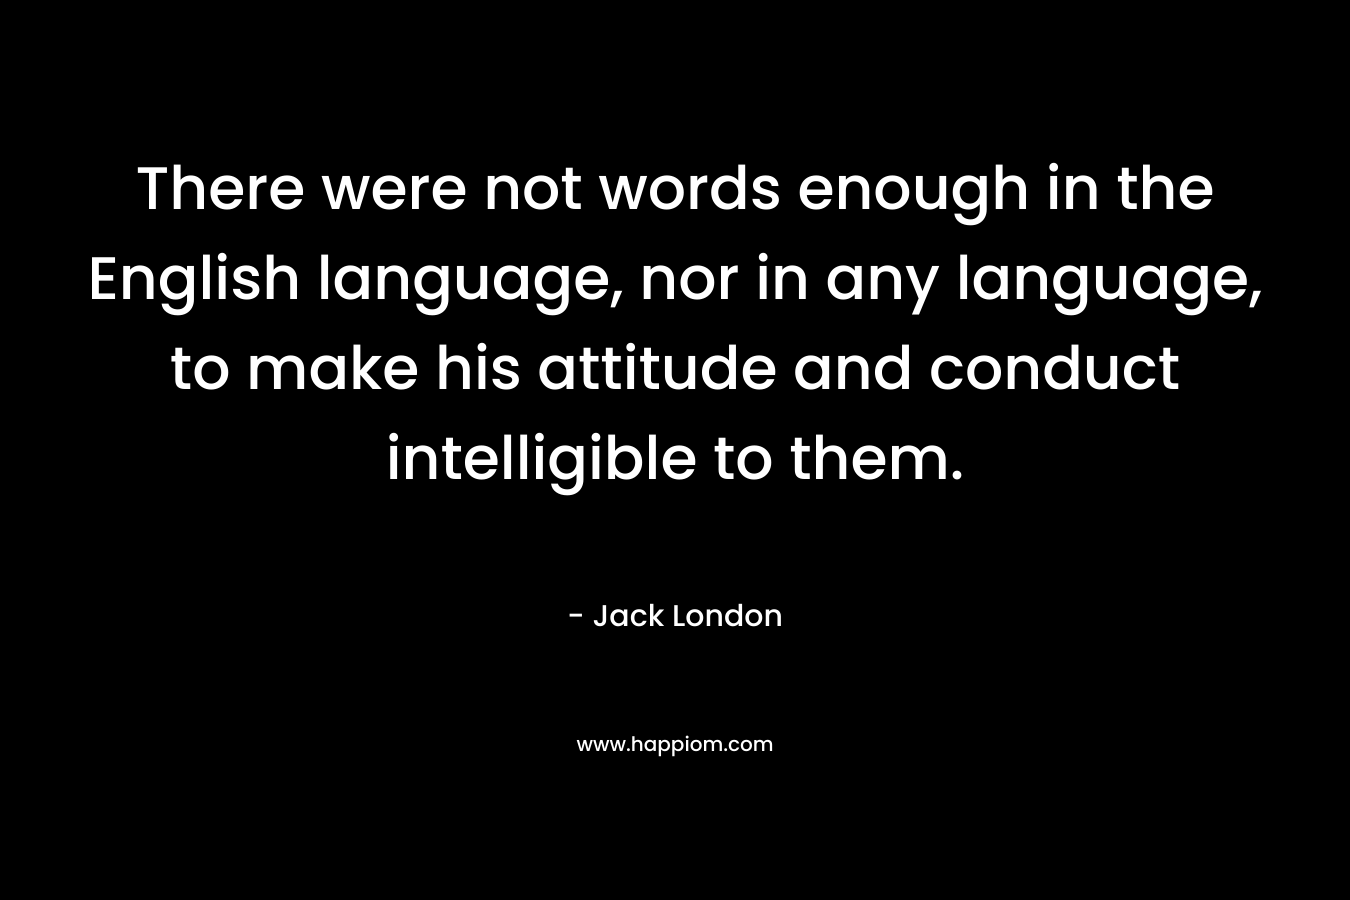 There were not words enough in the English language, nor in any language, to make his attitude and conduct intelligible to them. – Jack London